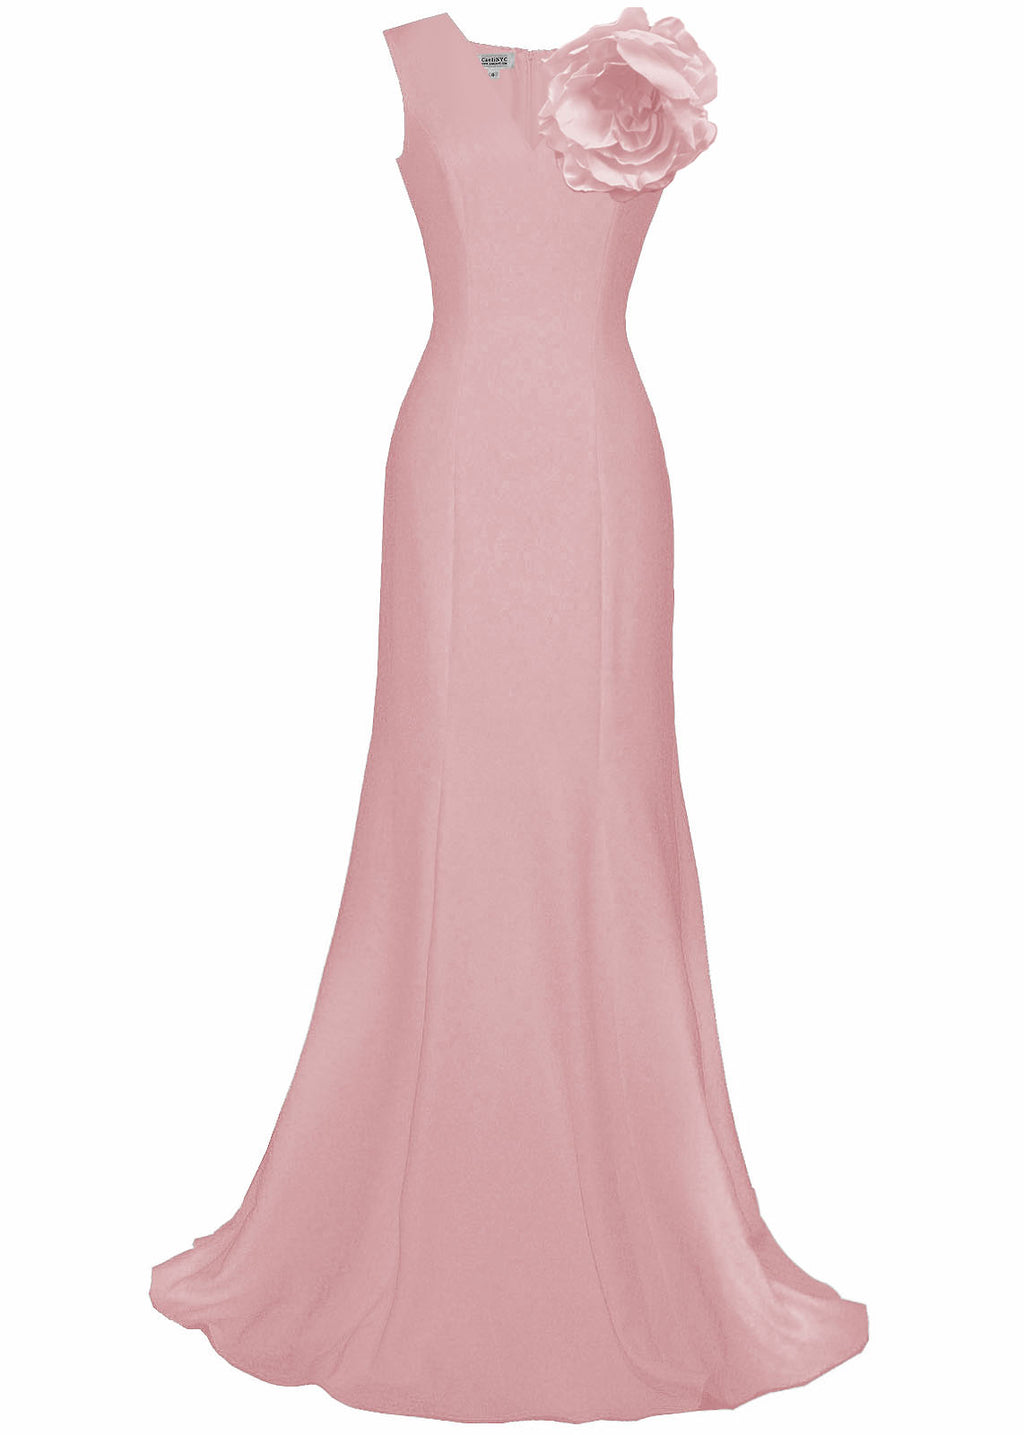 Terra V-Neck Tailored Gown with Statement Flower